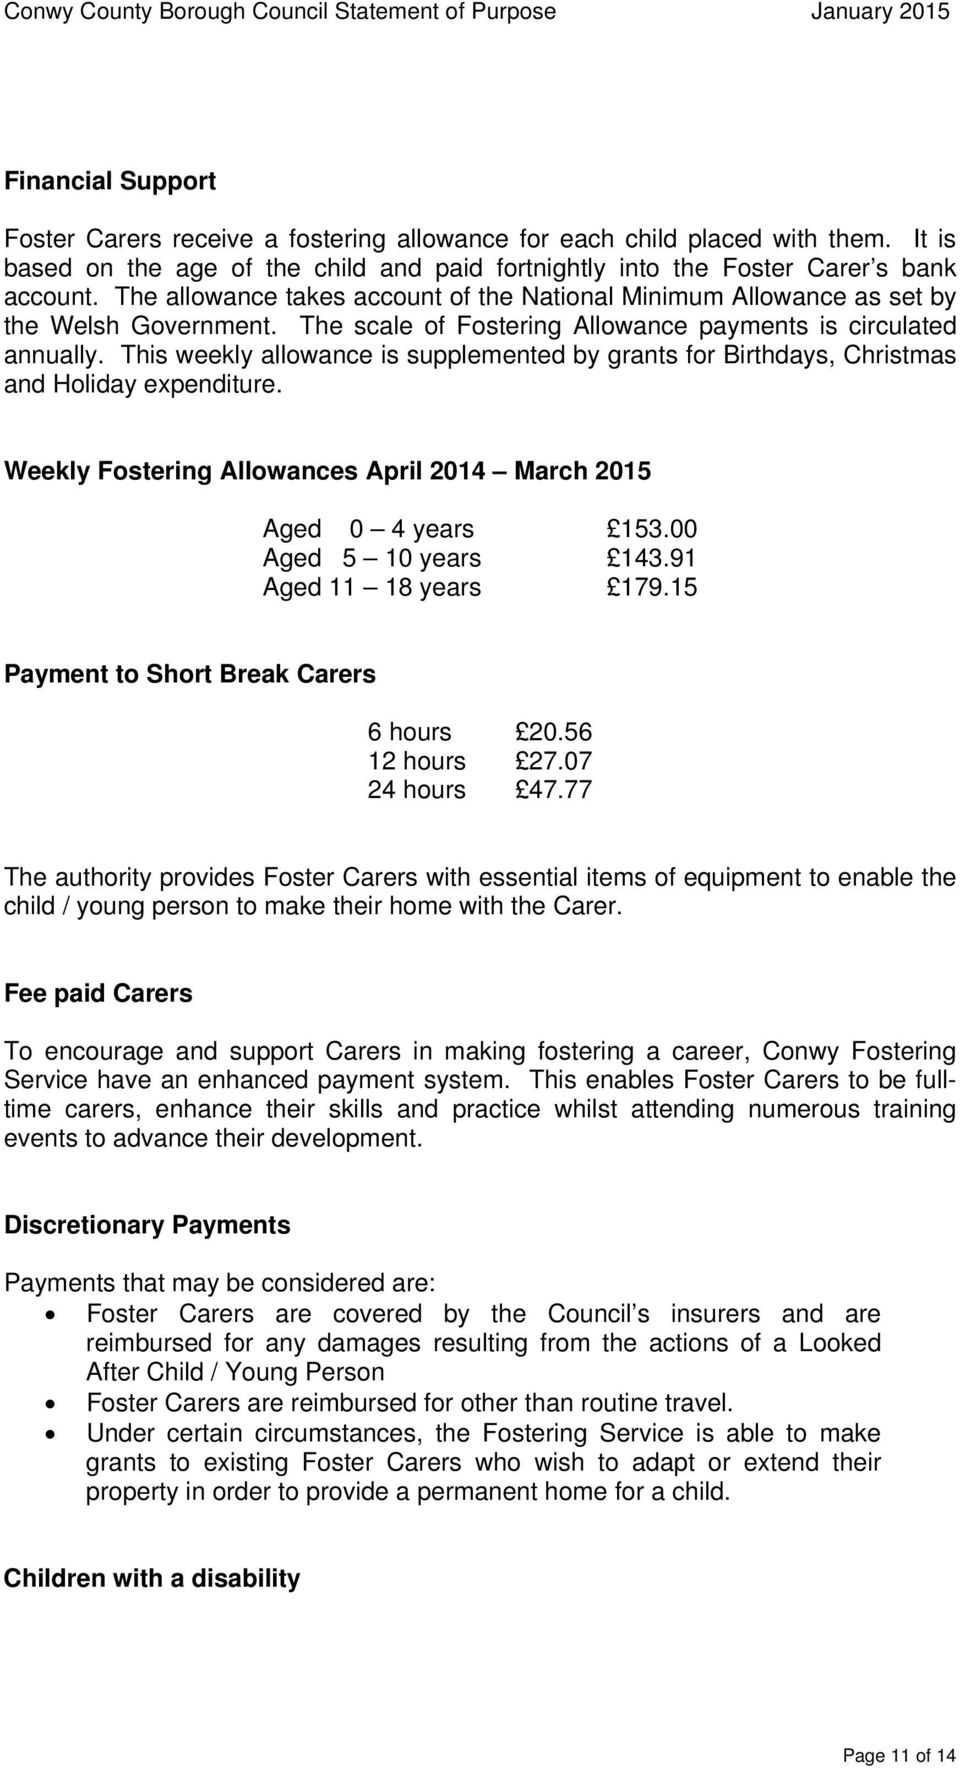 This weekly allowance is supplemented by grants for Birthdays, Christmas and Holiday expenditure. Weekly Fostering Allowances April 2014 March 2015 Aged 0 4 years 153.00 Aged 5 10 years 143.